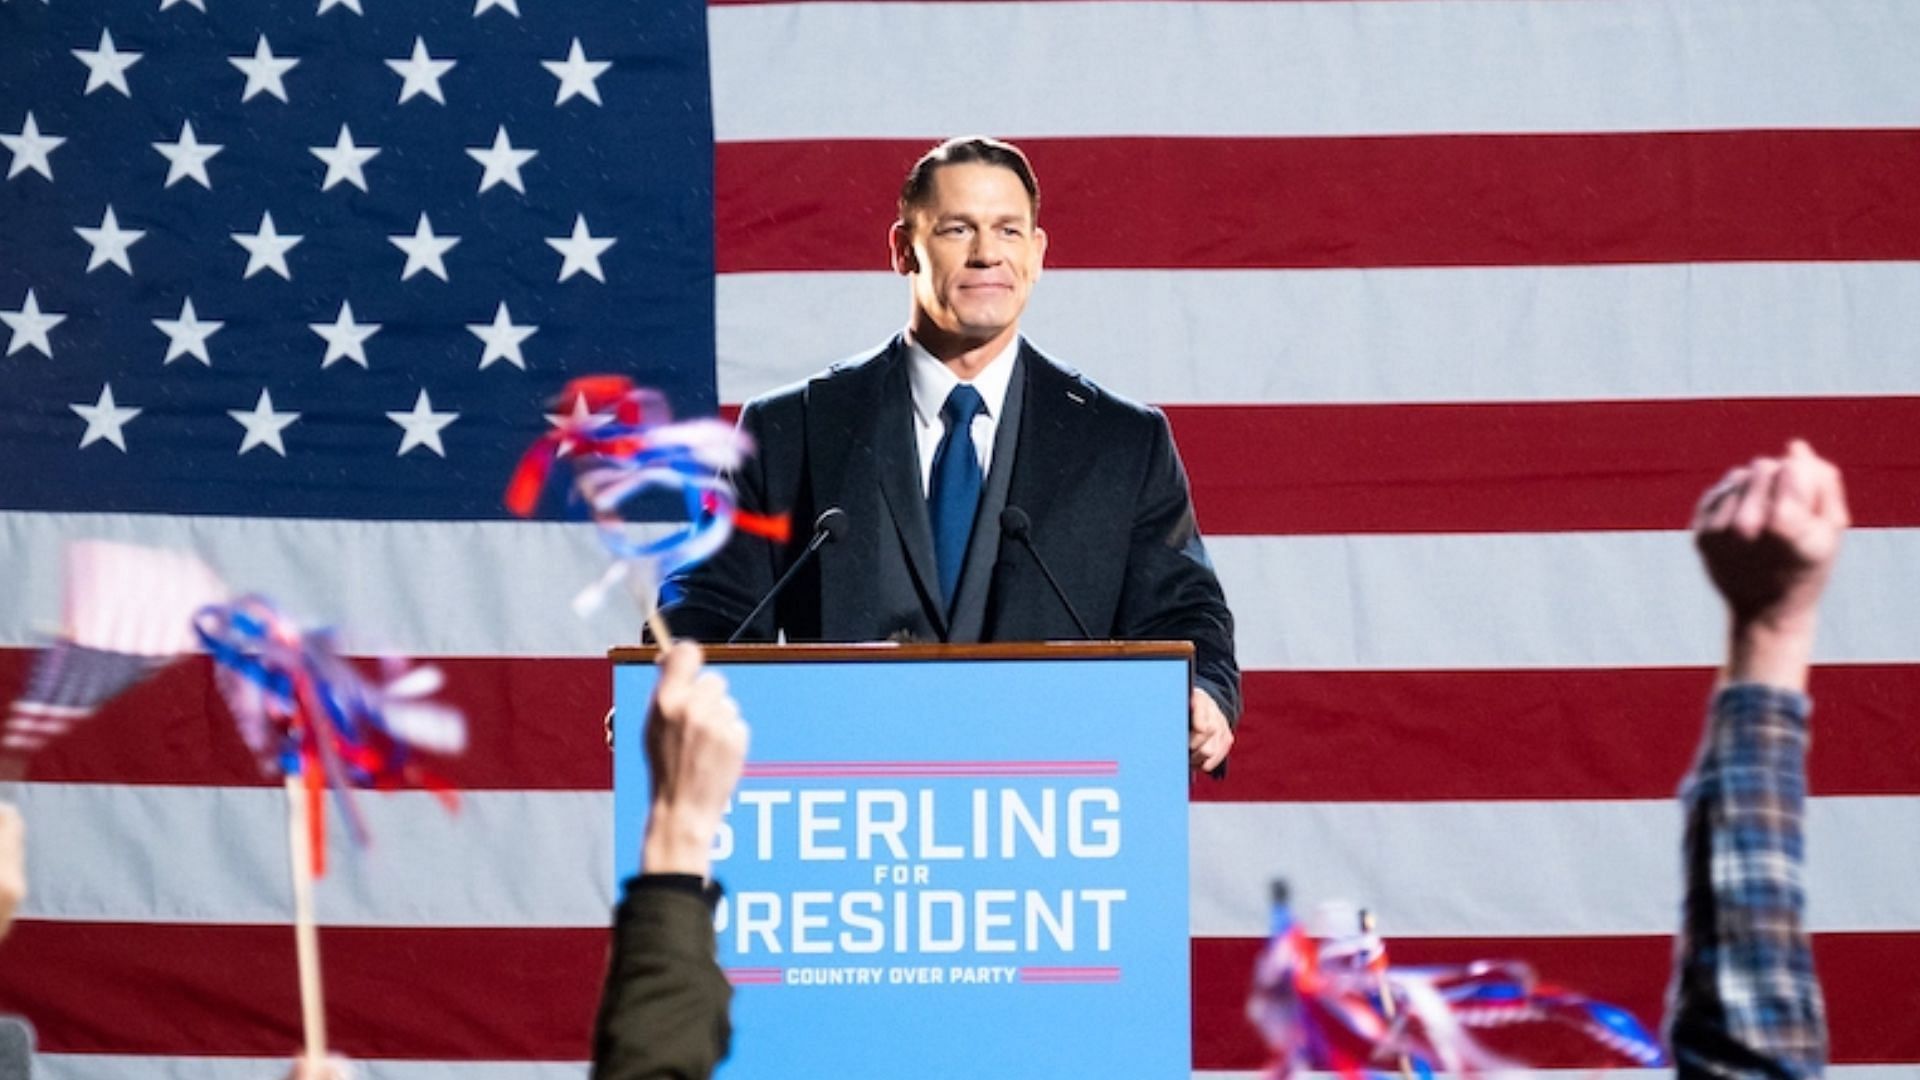 WWE Superstar John Cena has a new film coming out soon